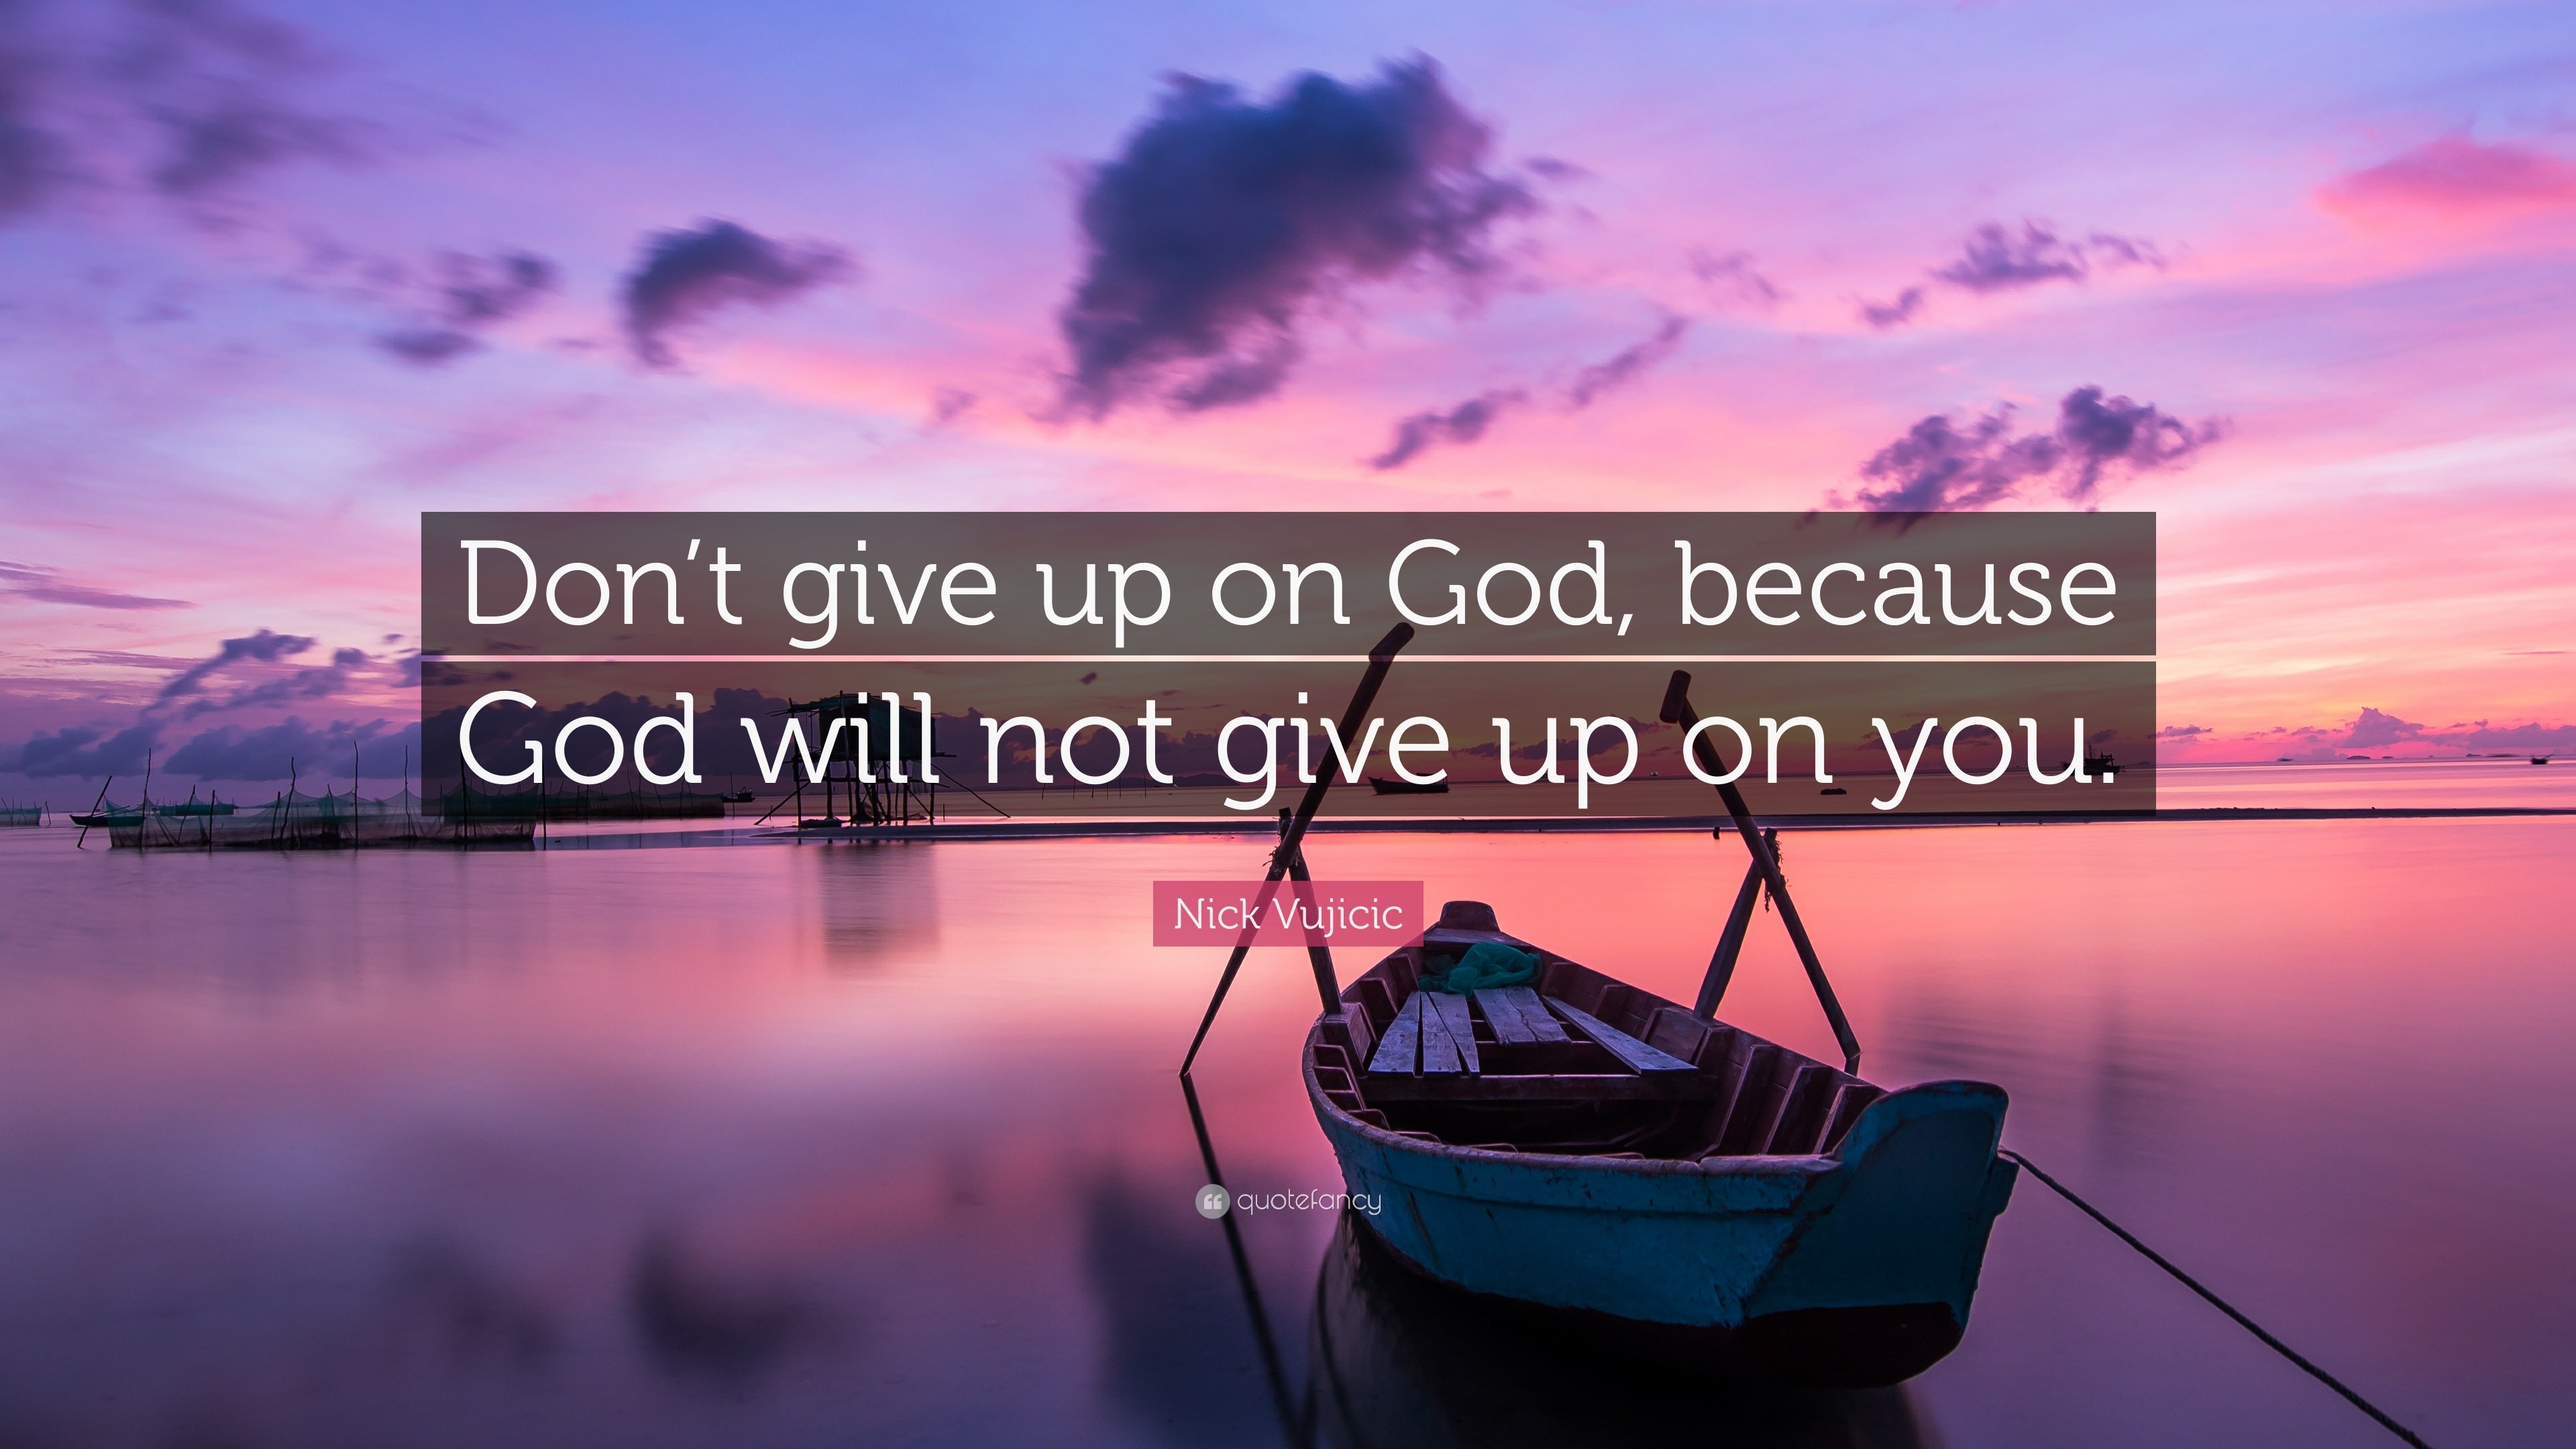 Nick Vujicic Quote: “Don’t give up on God, because God will not give up